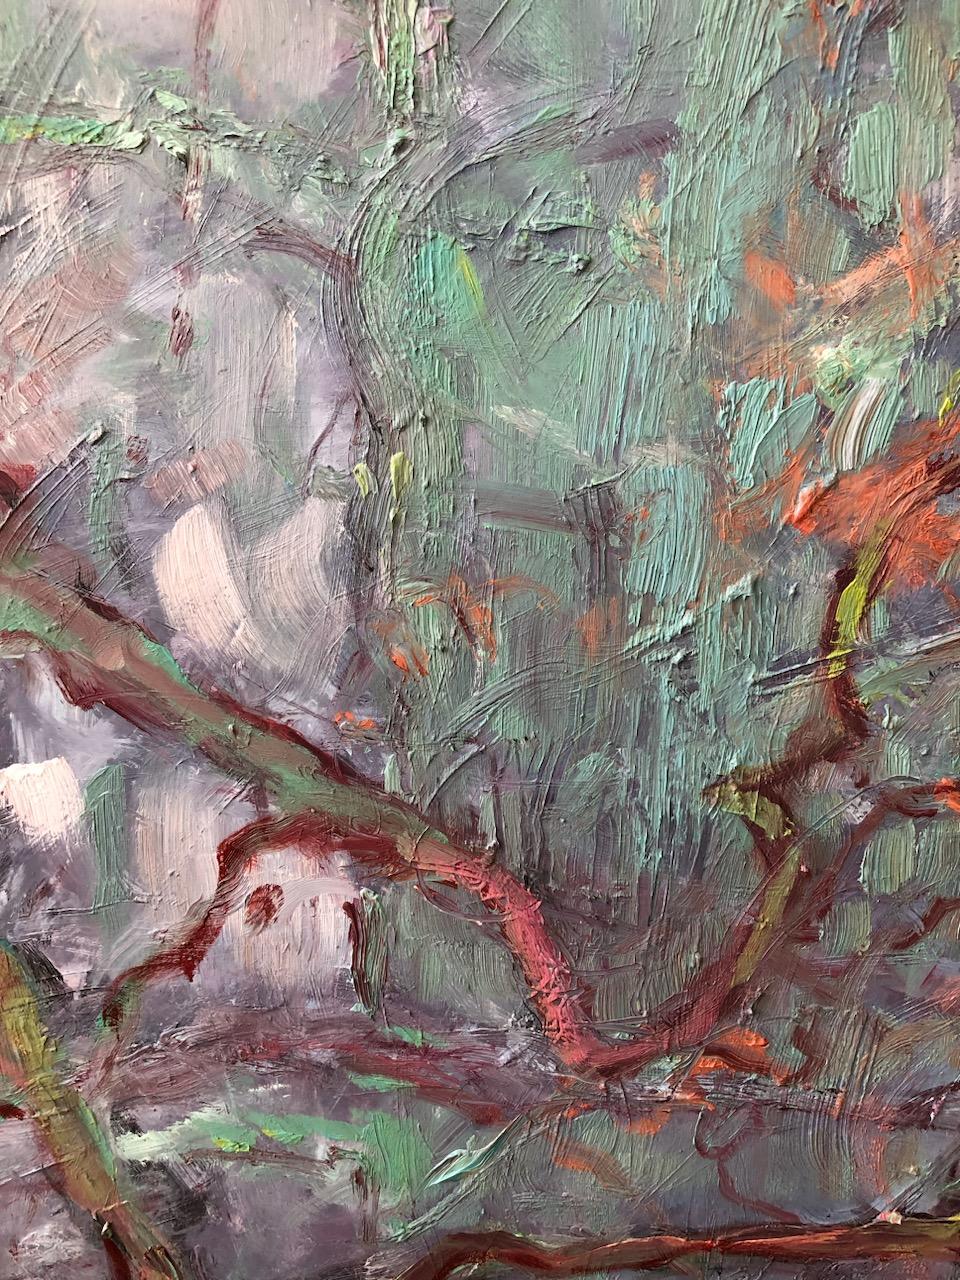 “Limbs” by Catherine Picard-Gibbs is a highly textural oil painting, with a heightened color palette of purple, blue, green, and salmon, depicting rich layers of tree branches creating an intriguing sense of space. Expressive brush strokes and marks